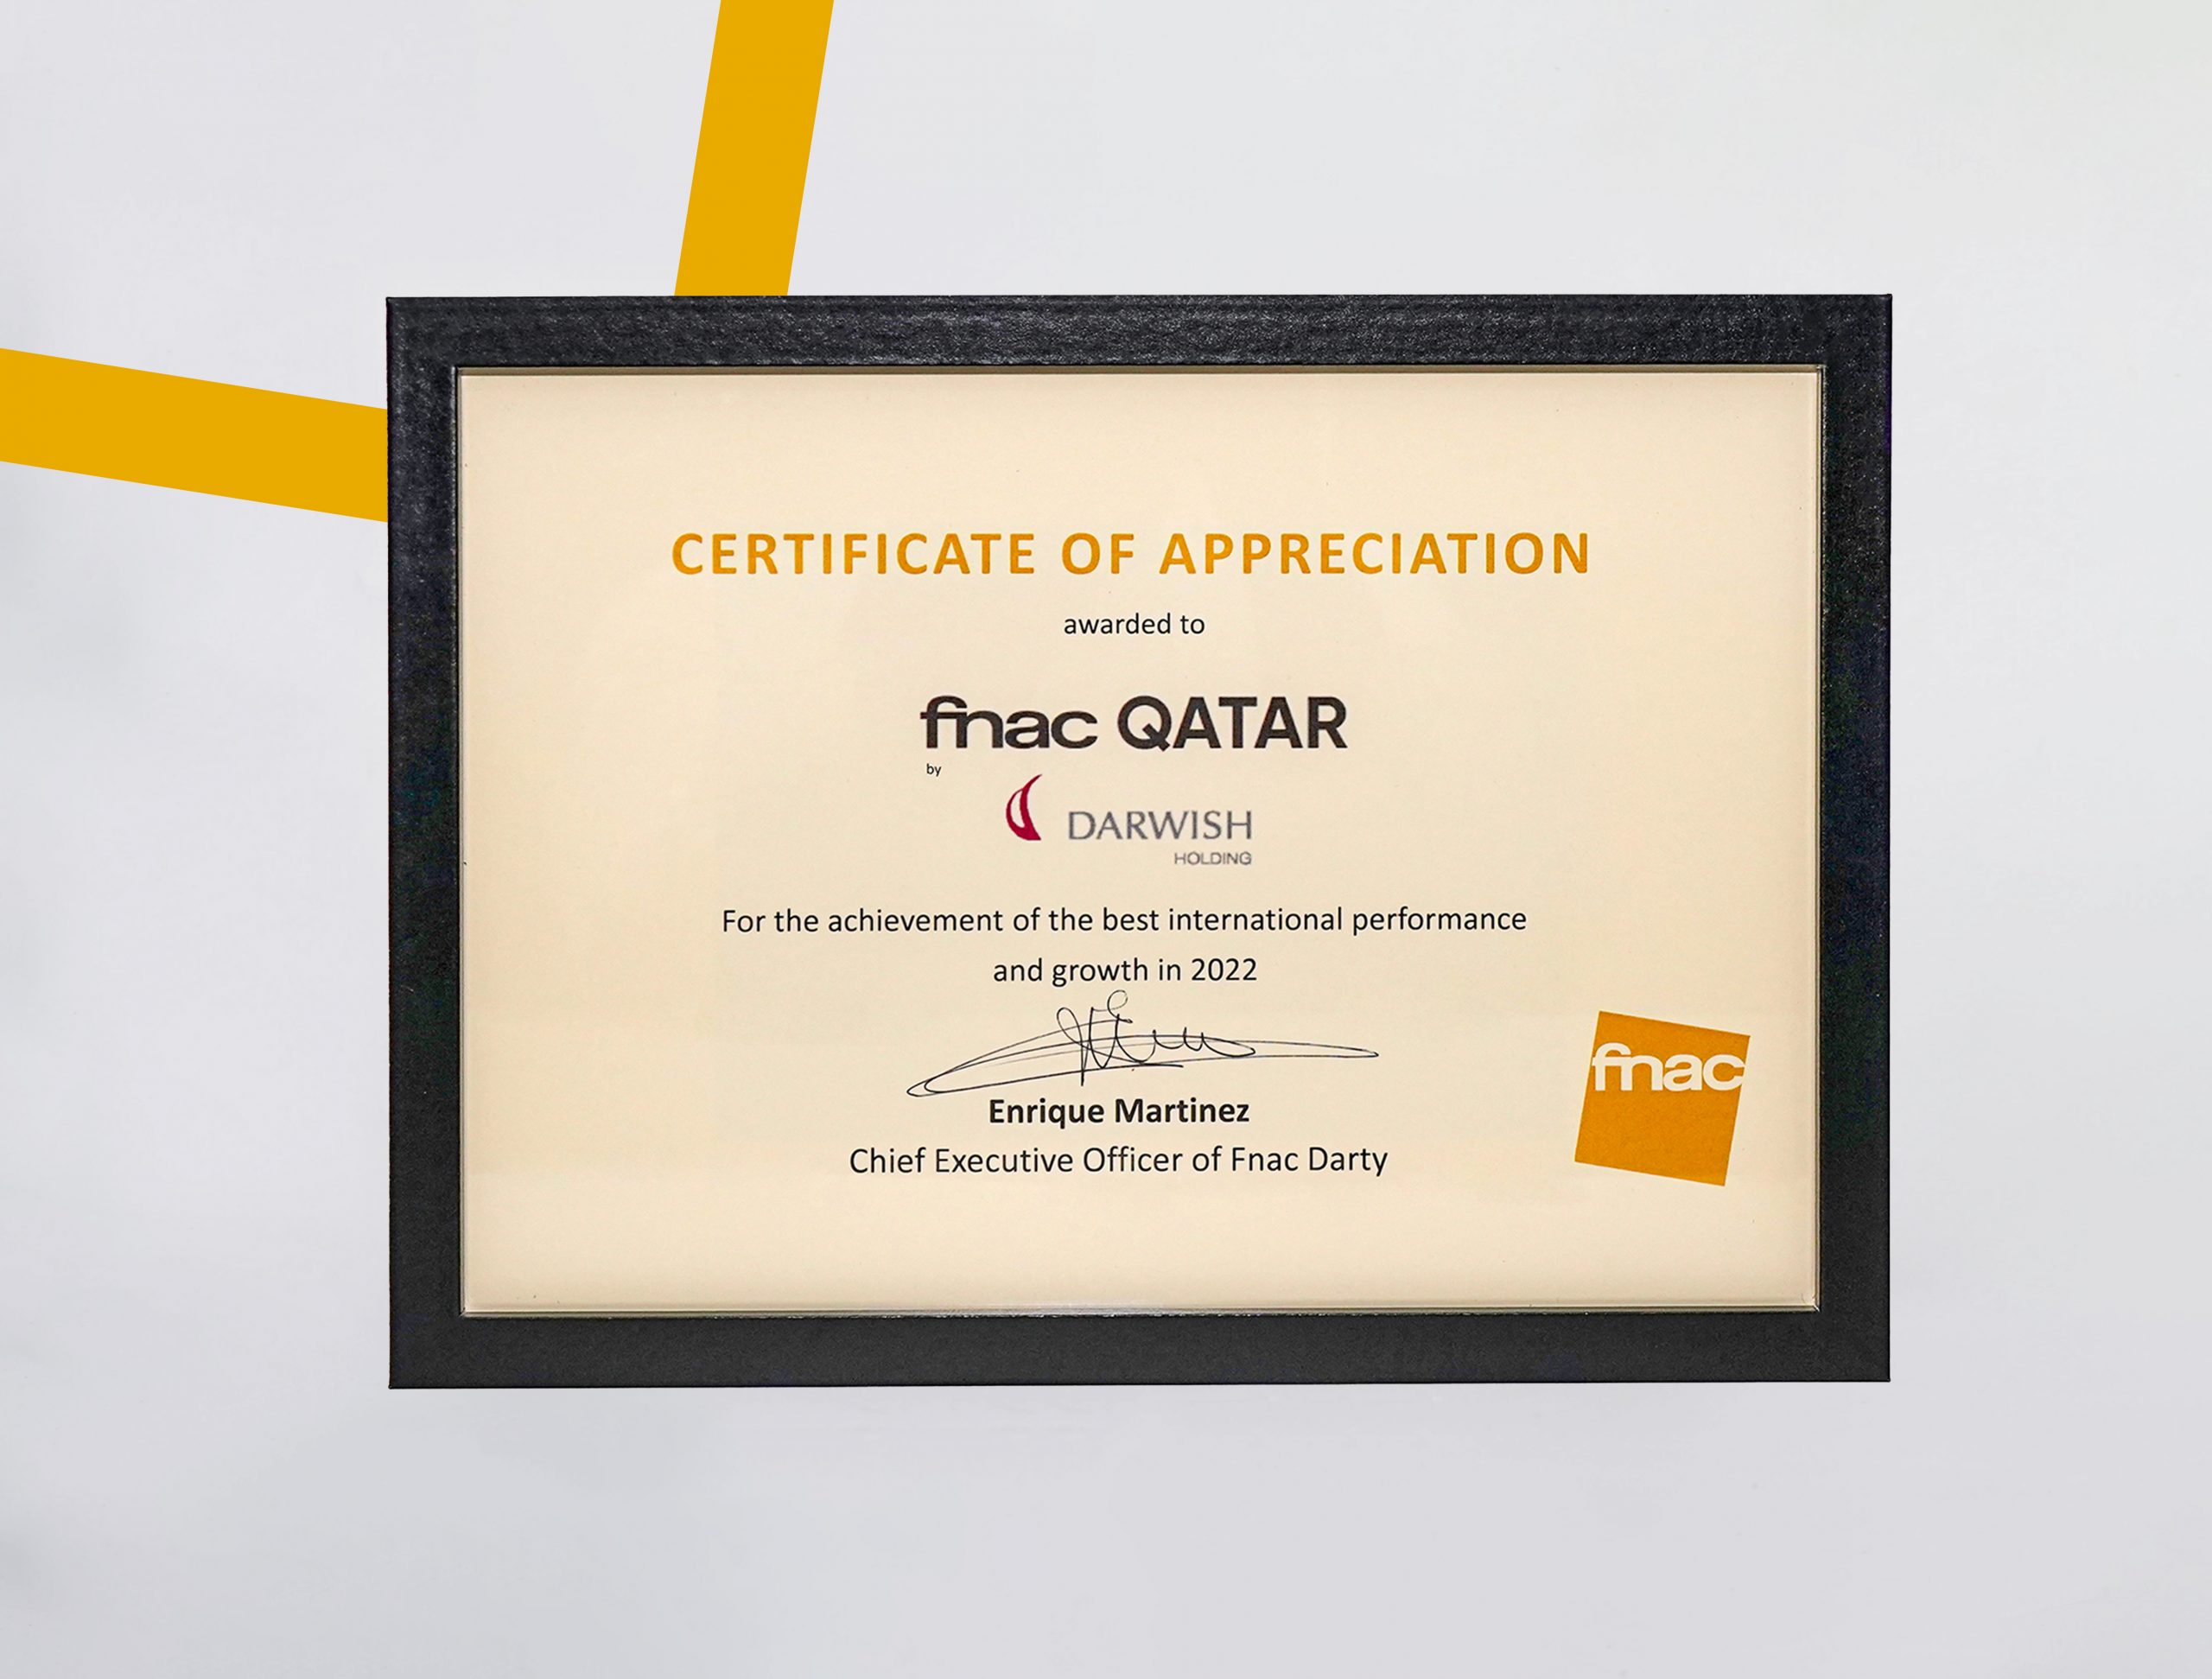 For the second time, Fnac Darty Group recognizes Fnac Qatar for “Best International Performance and Growth”